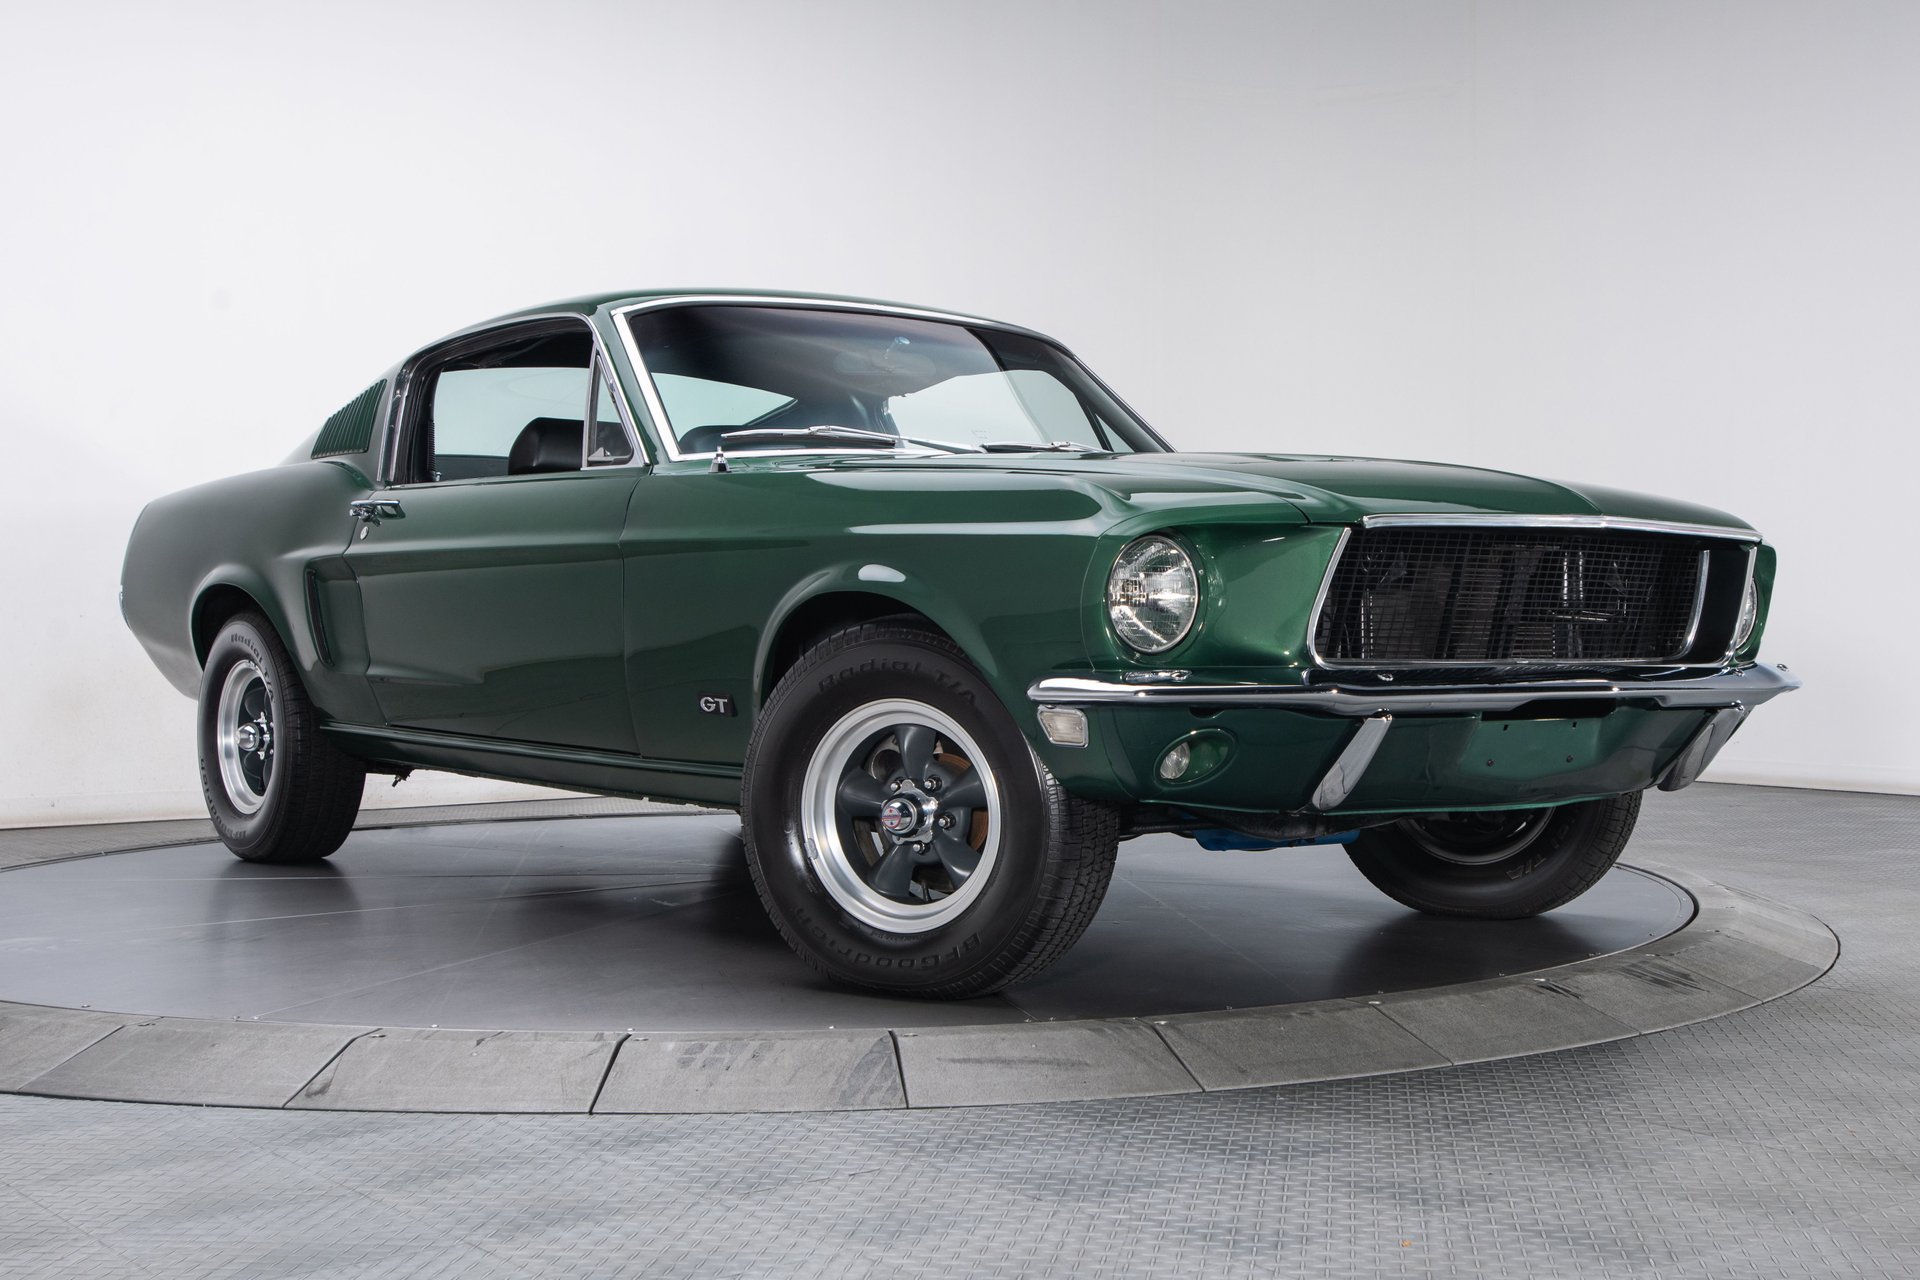 1968 Ford Mustang | RK Motors Classic Cars and Muscle Cars for Sale